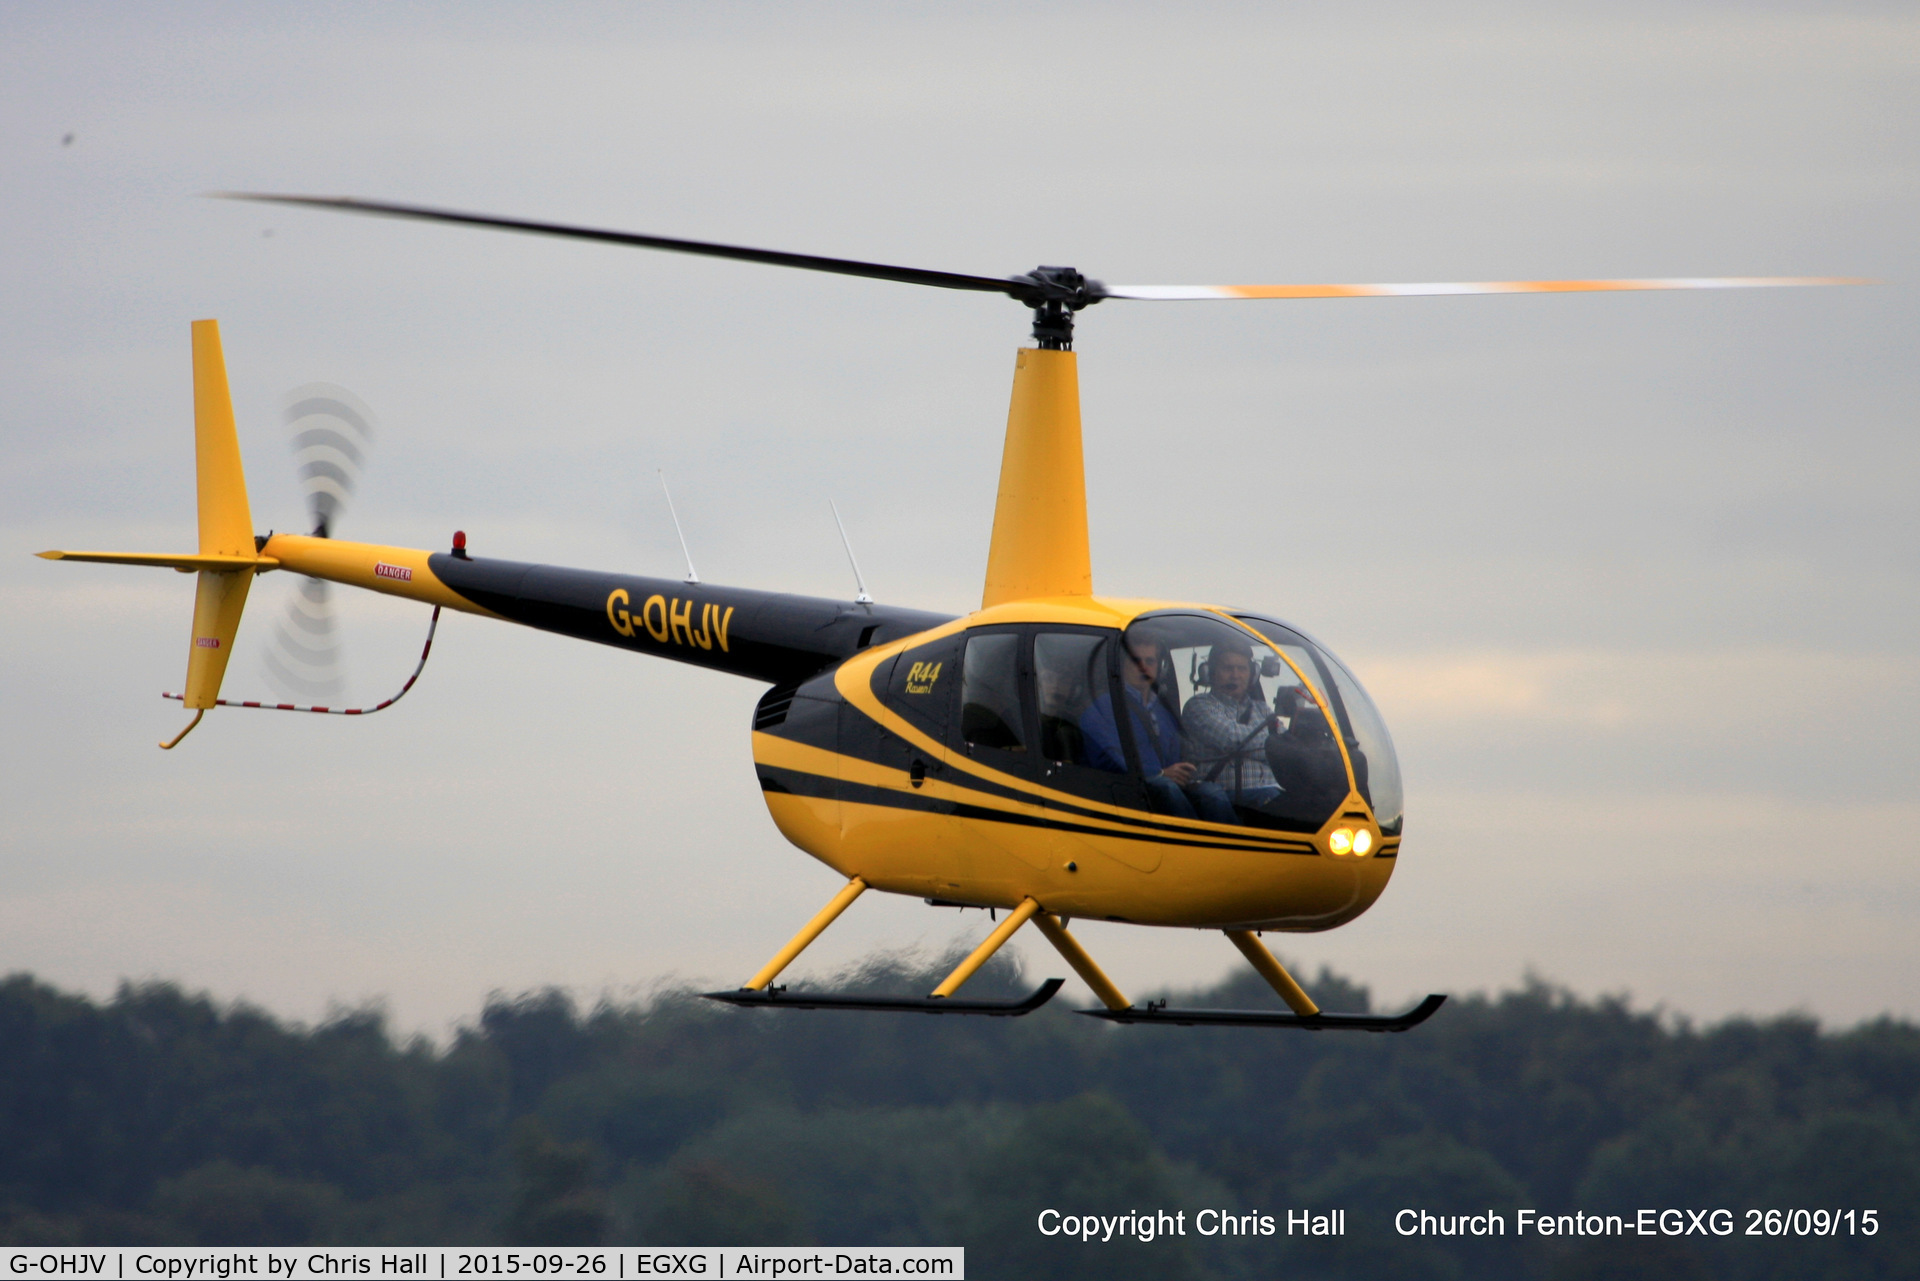 G-OHJV, 2007 Robinson R44 Raven I C/N 1722, at the Yorkshire Airshow